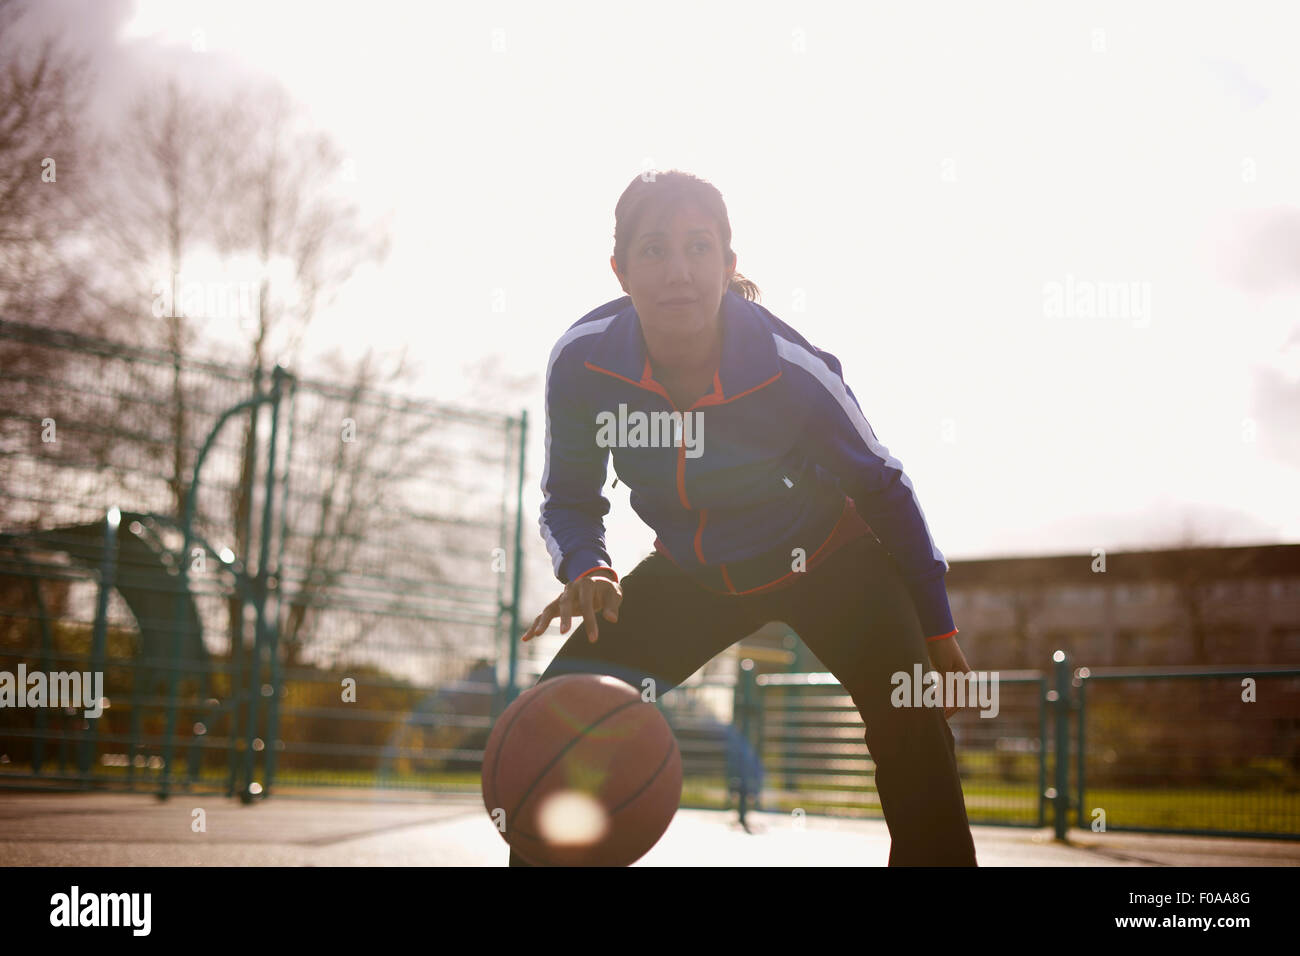 Young woman playing basketball in park Banque D'Images